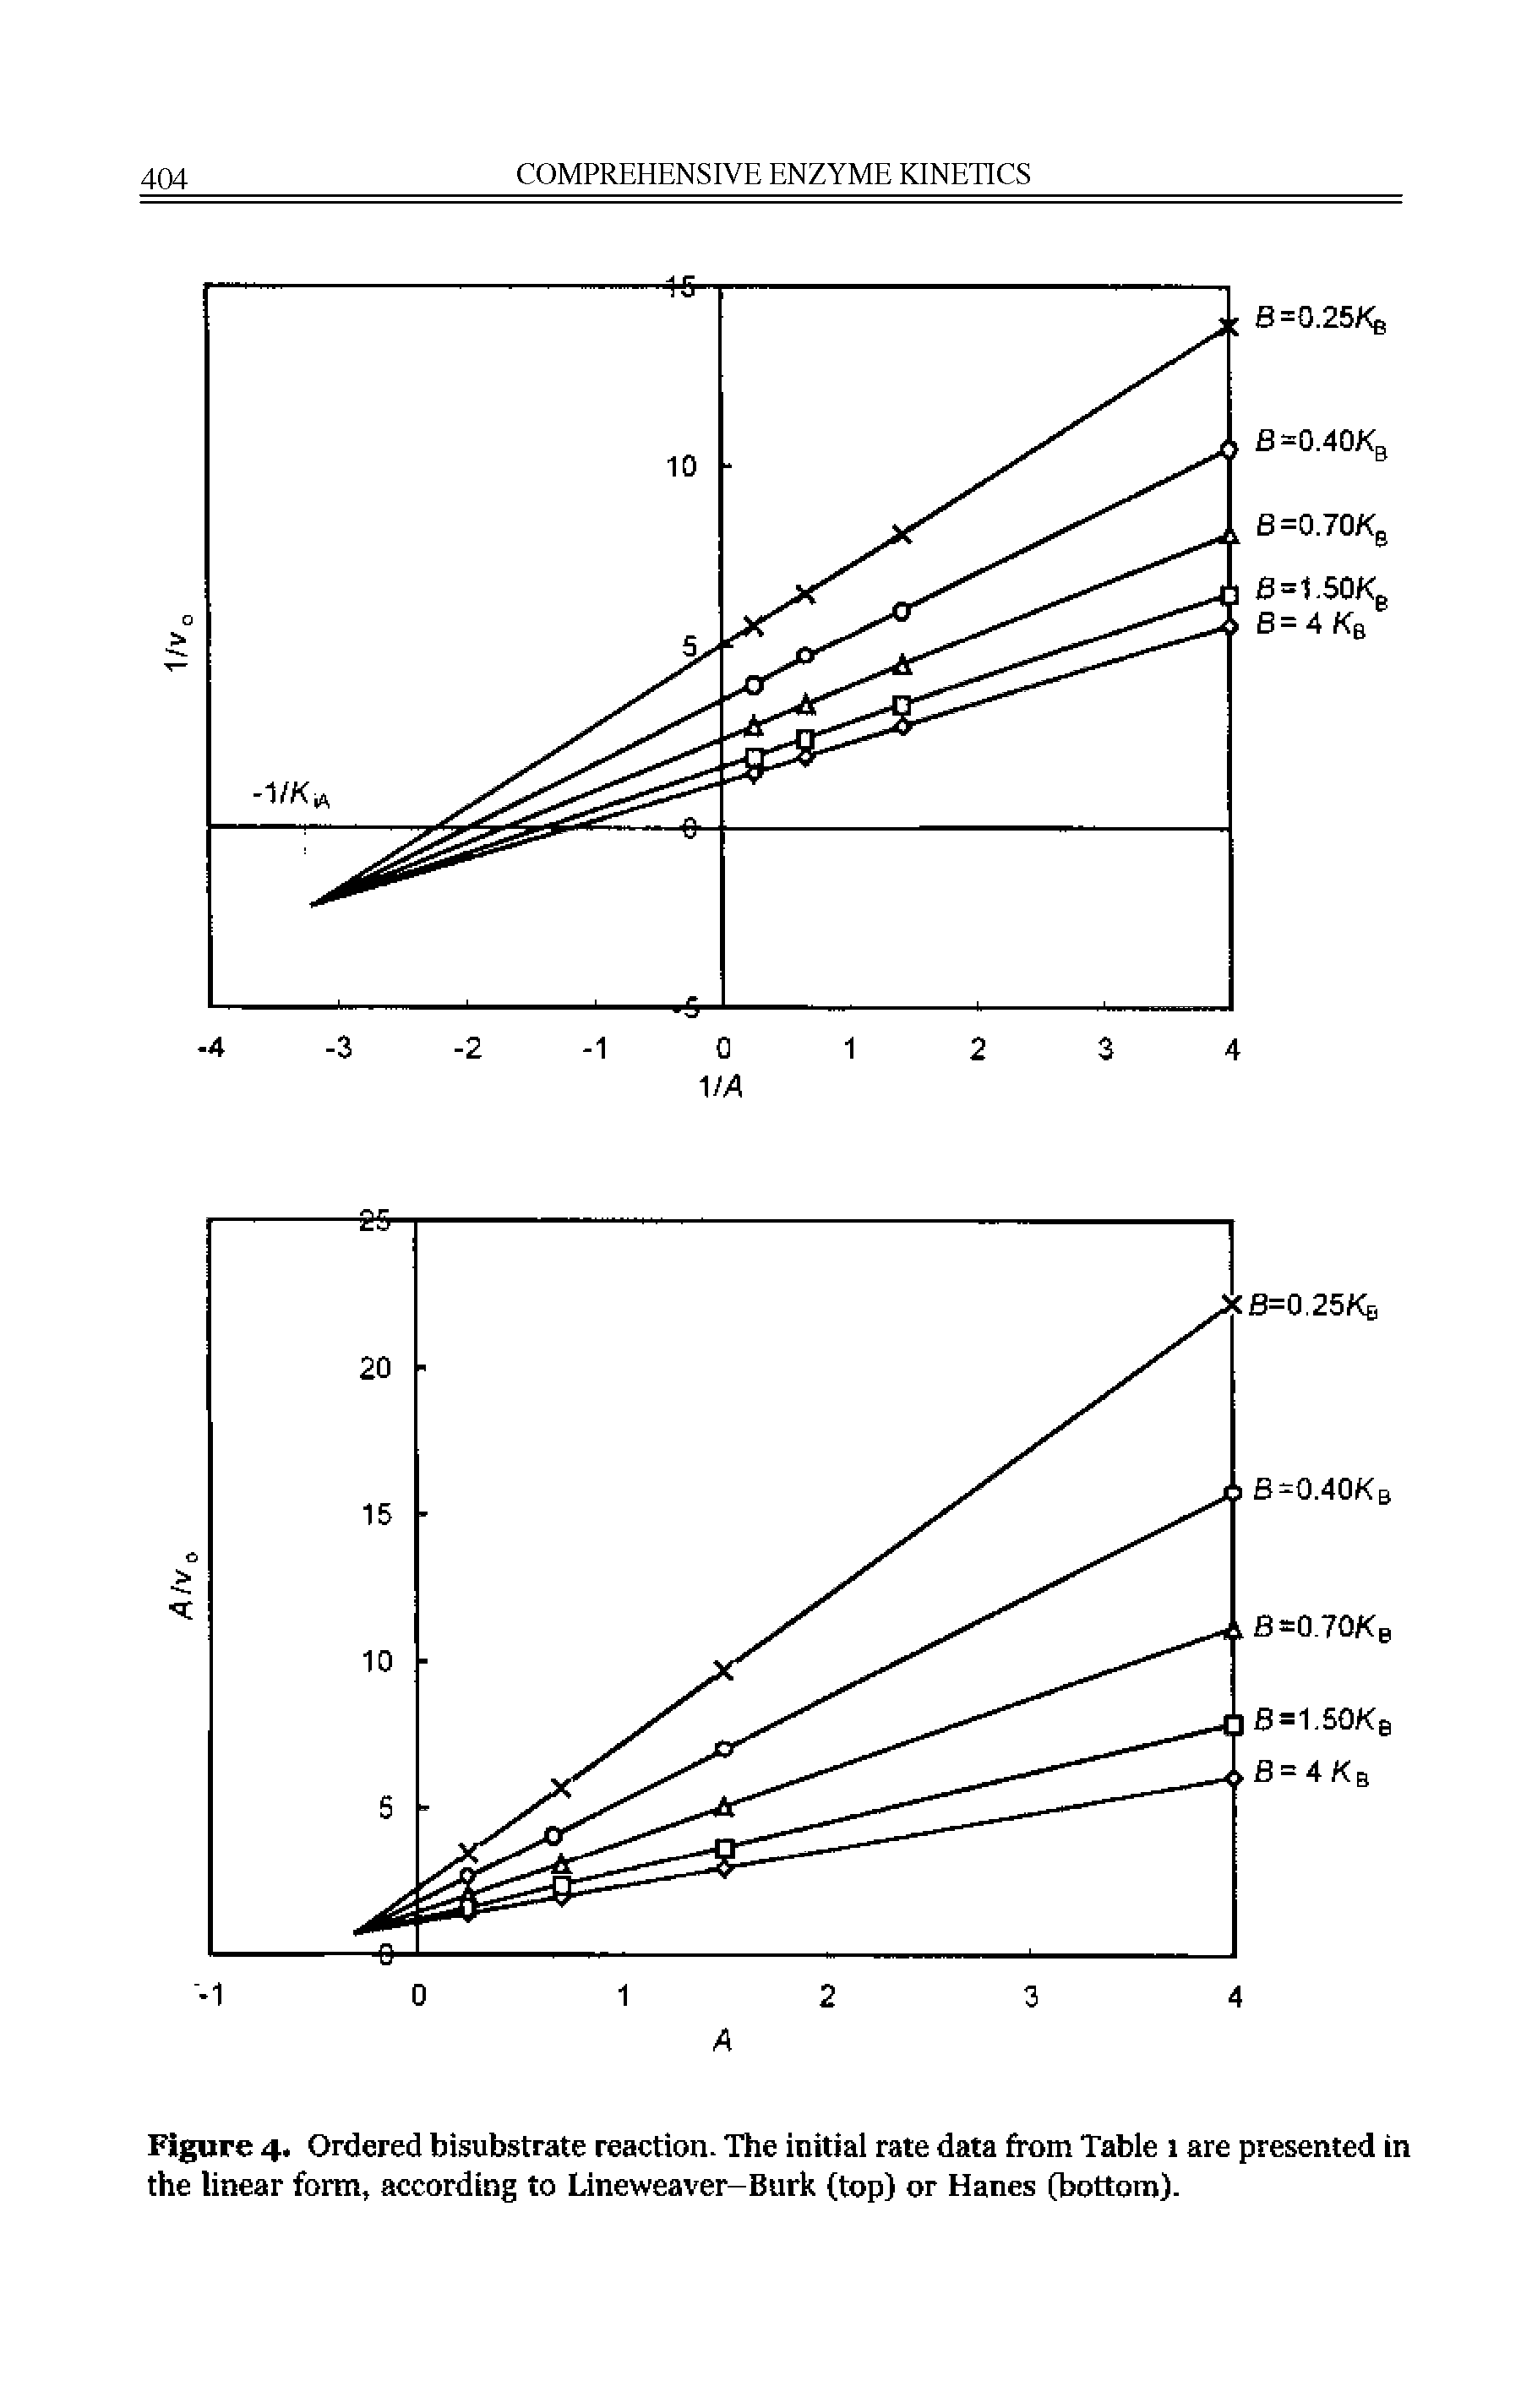 Figure 4. Ordered bisubstrate reaction. The initial rate data from Table 1 are presented in the linear form, according to Line weaver-Burk (top) or Hanes (bottom).